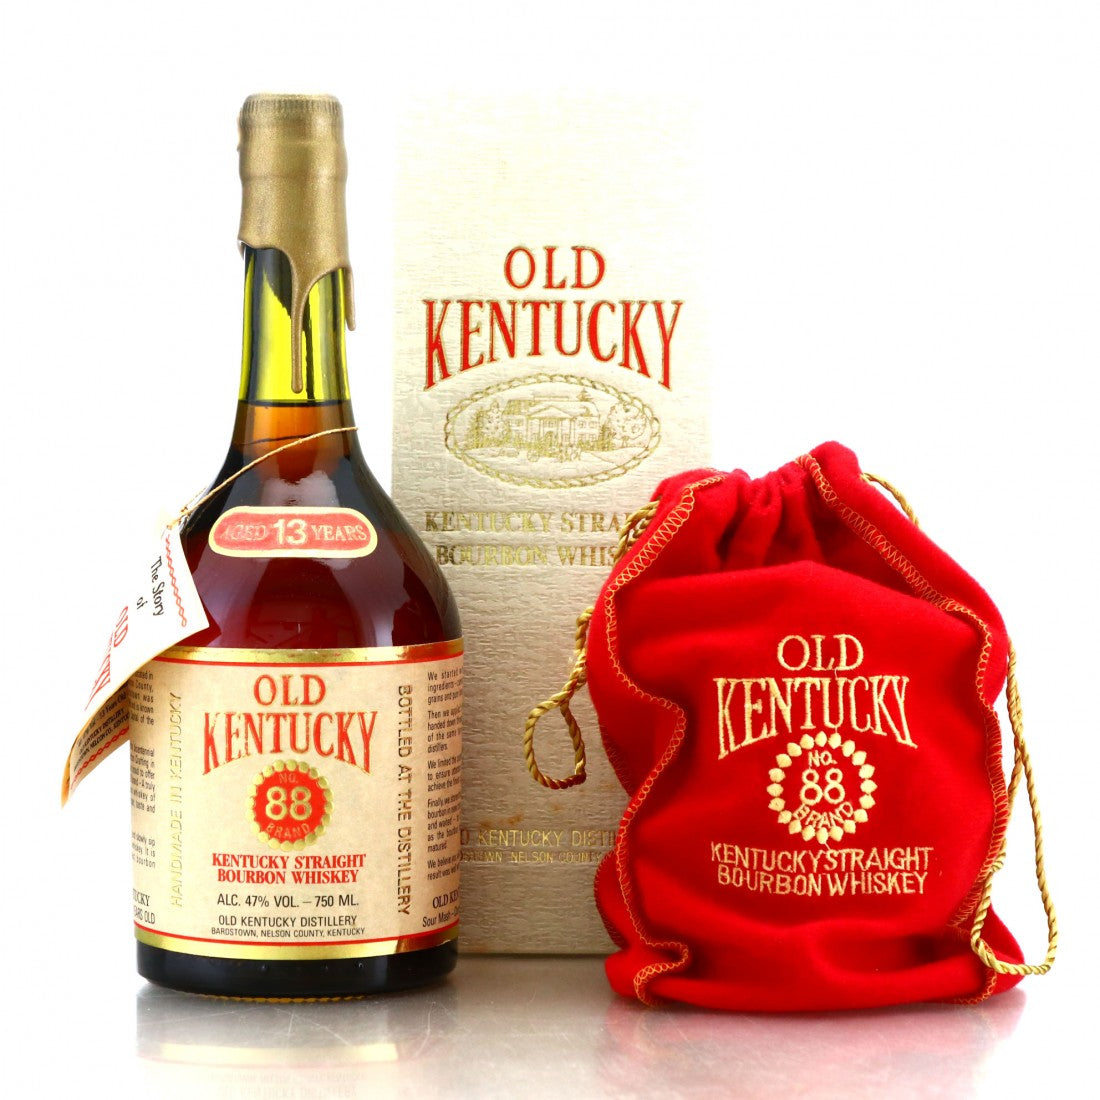 OLD KENTUCKY NO.88 BRAND バーボンウィスキー-